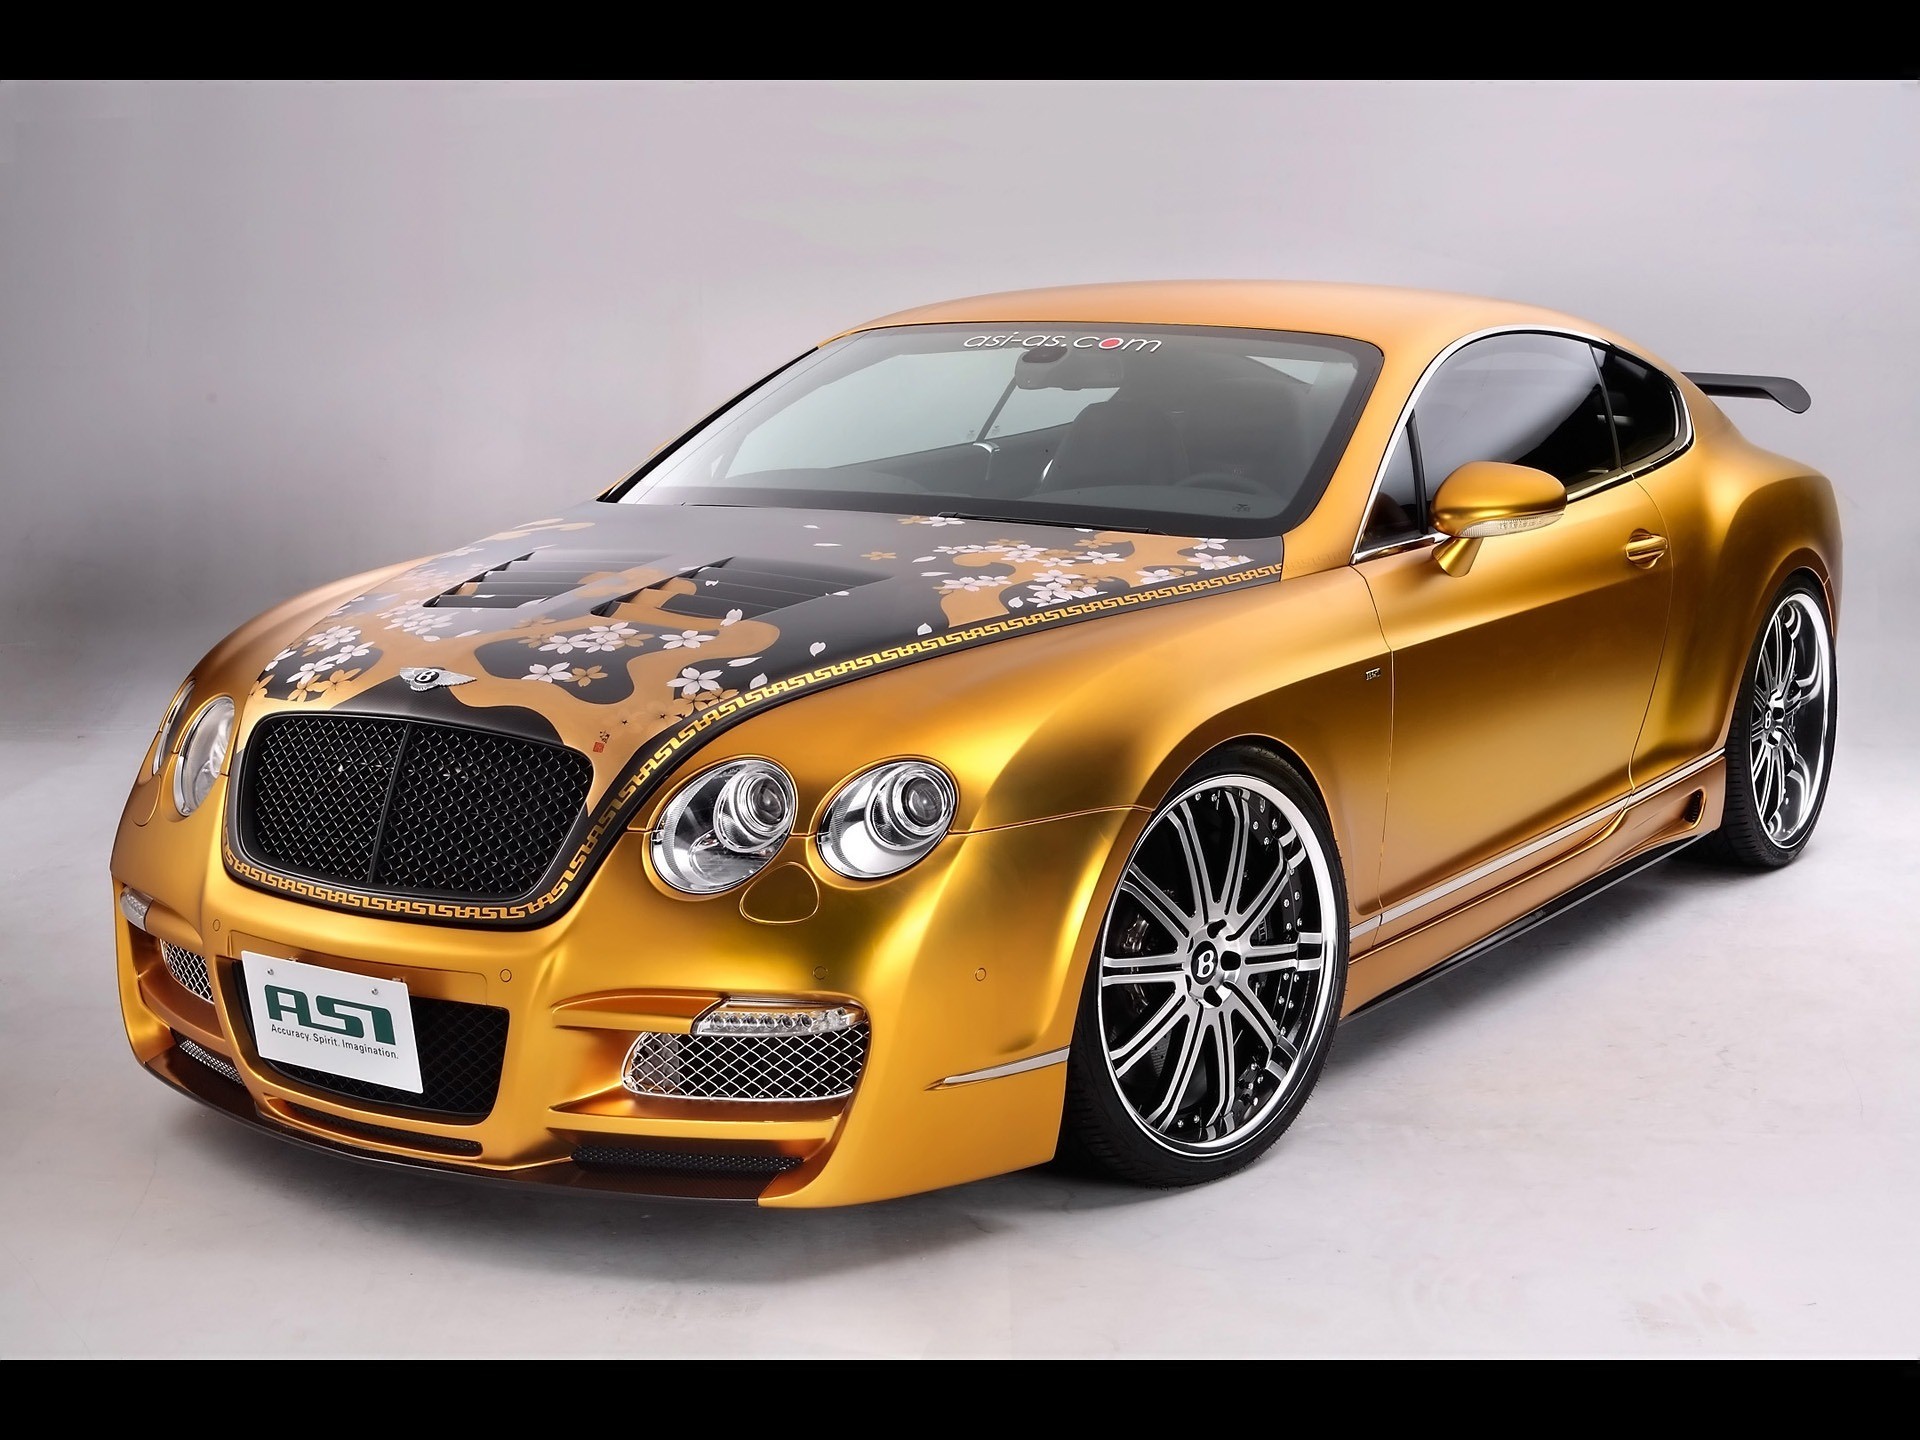 1920x1440 Bentley Cars The One Car wallpaper